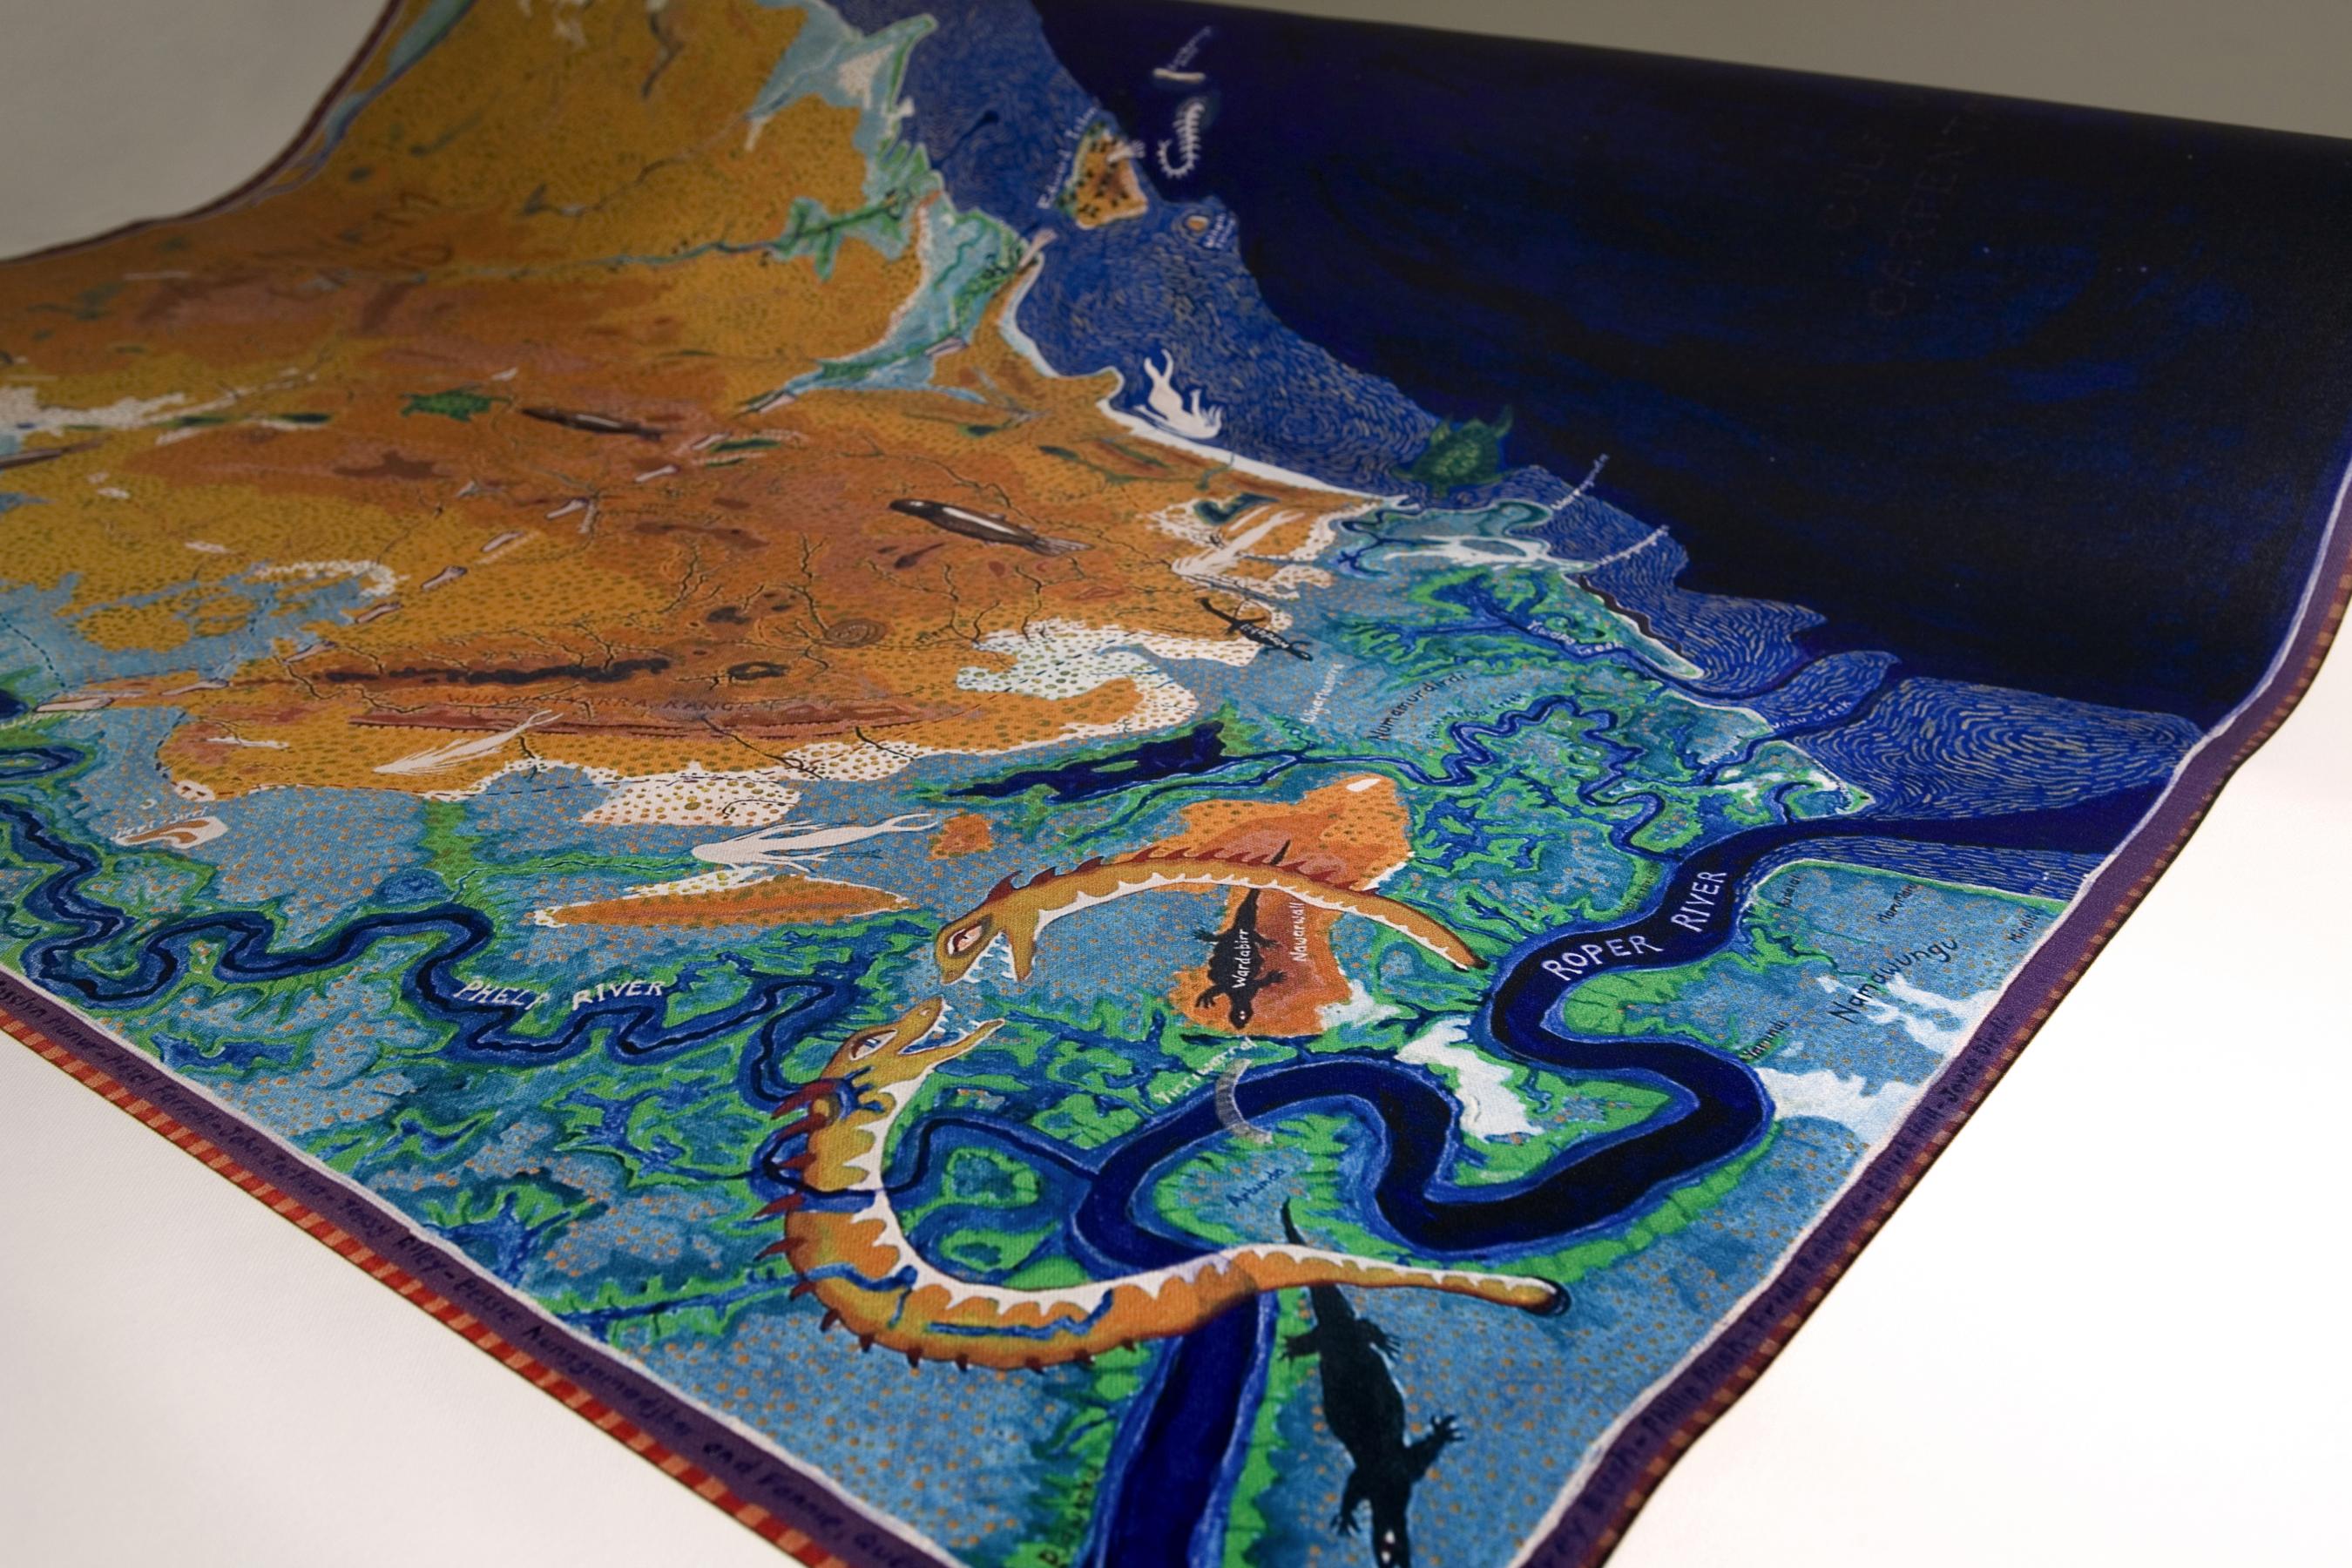 Photo of a digitally painted pictorial map of the Gulf of Carpentaria region